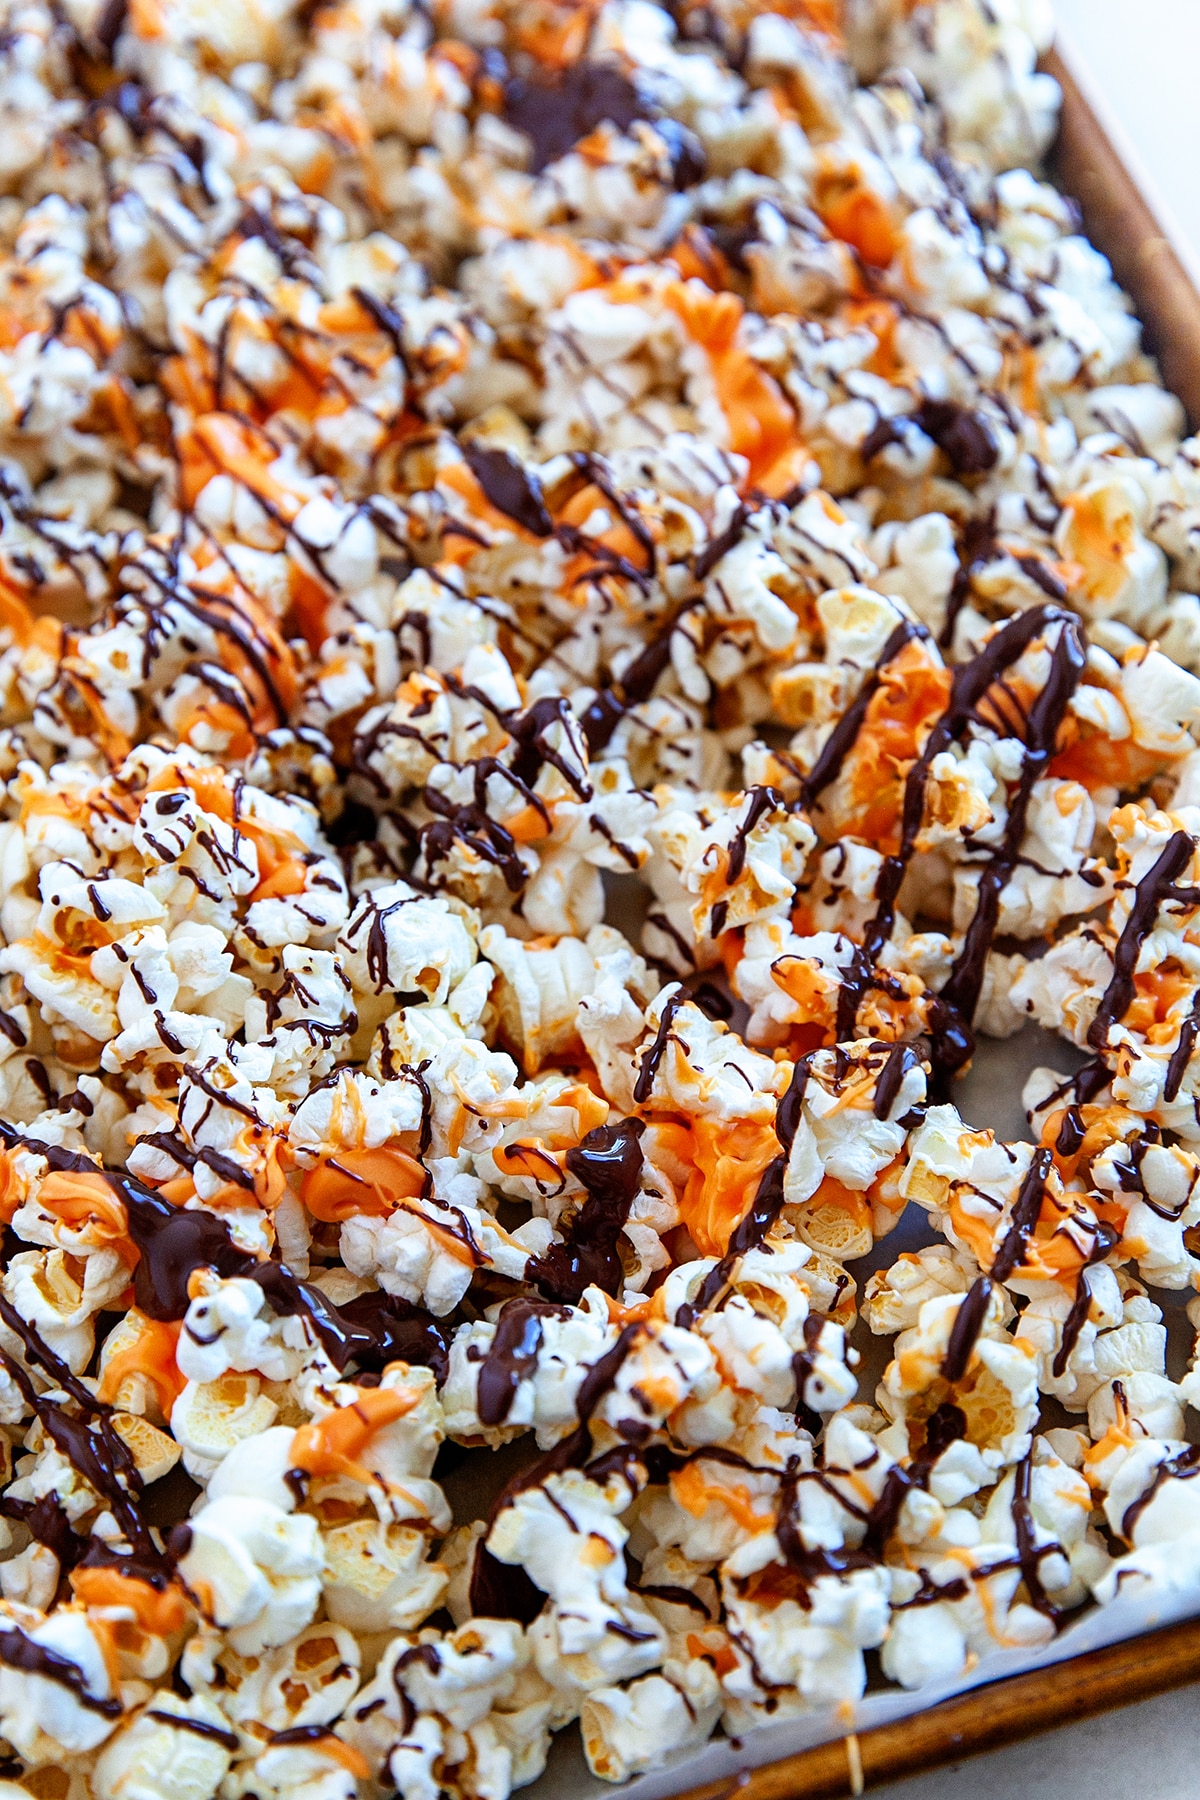 Popcorn drizzled with both orange and dark chocolate. 